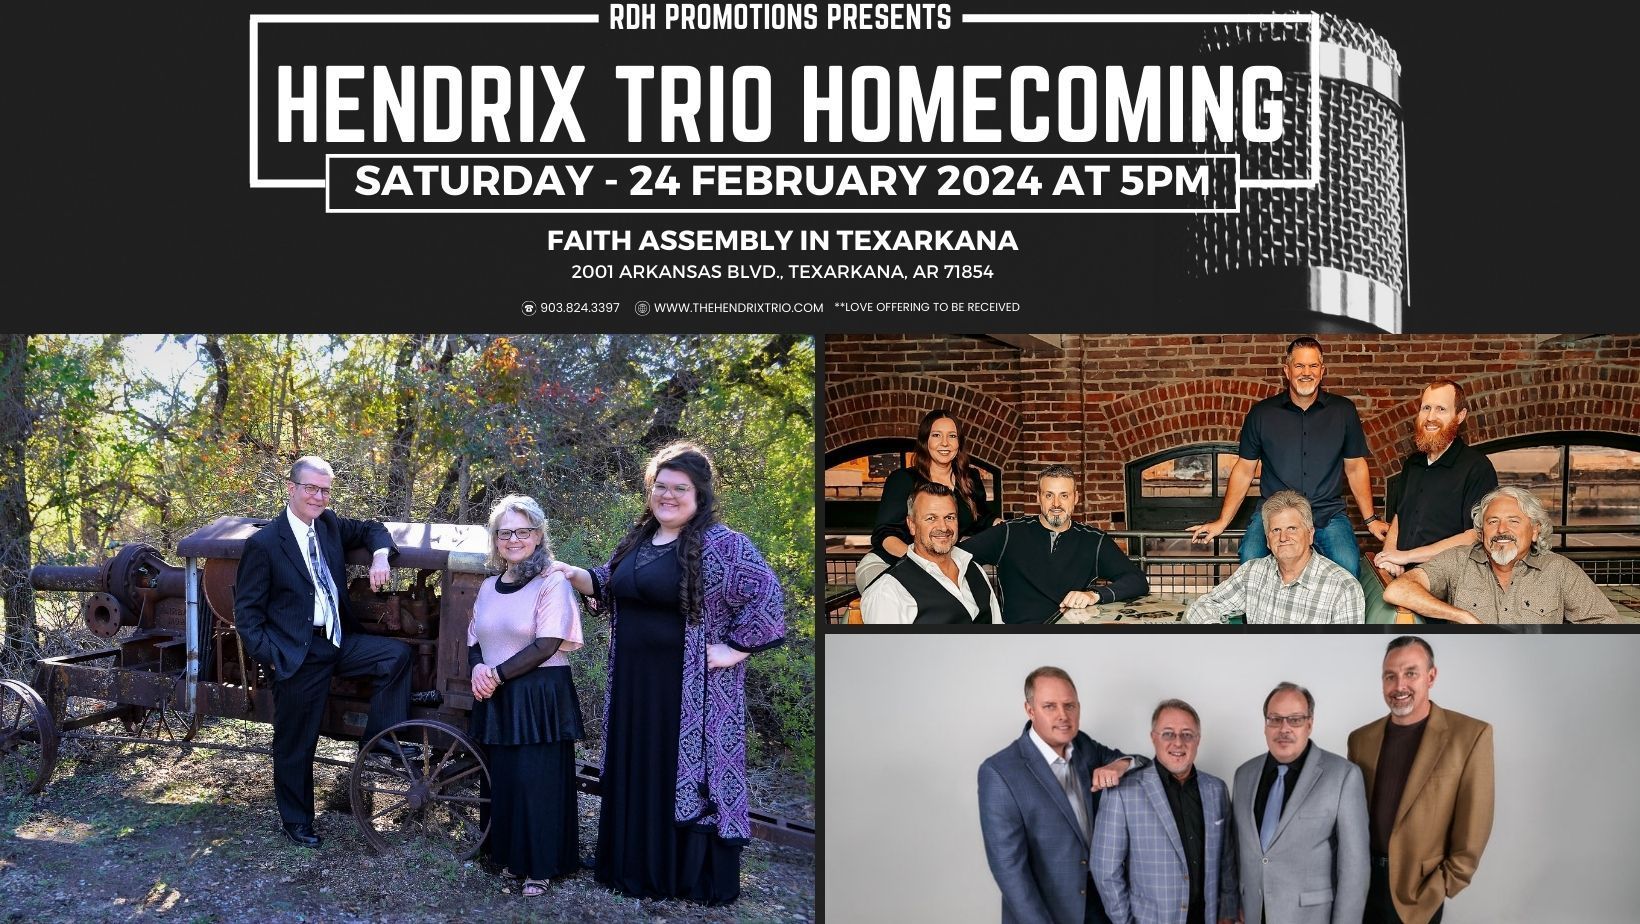 Southern Gospel Style Homecoming: Hosted by the Hendrix Trio